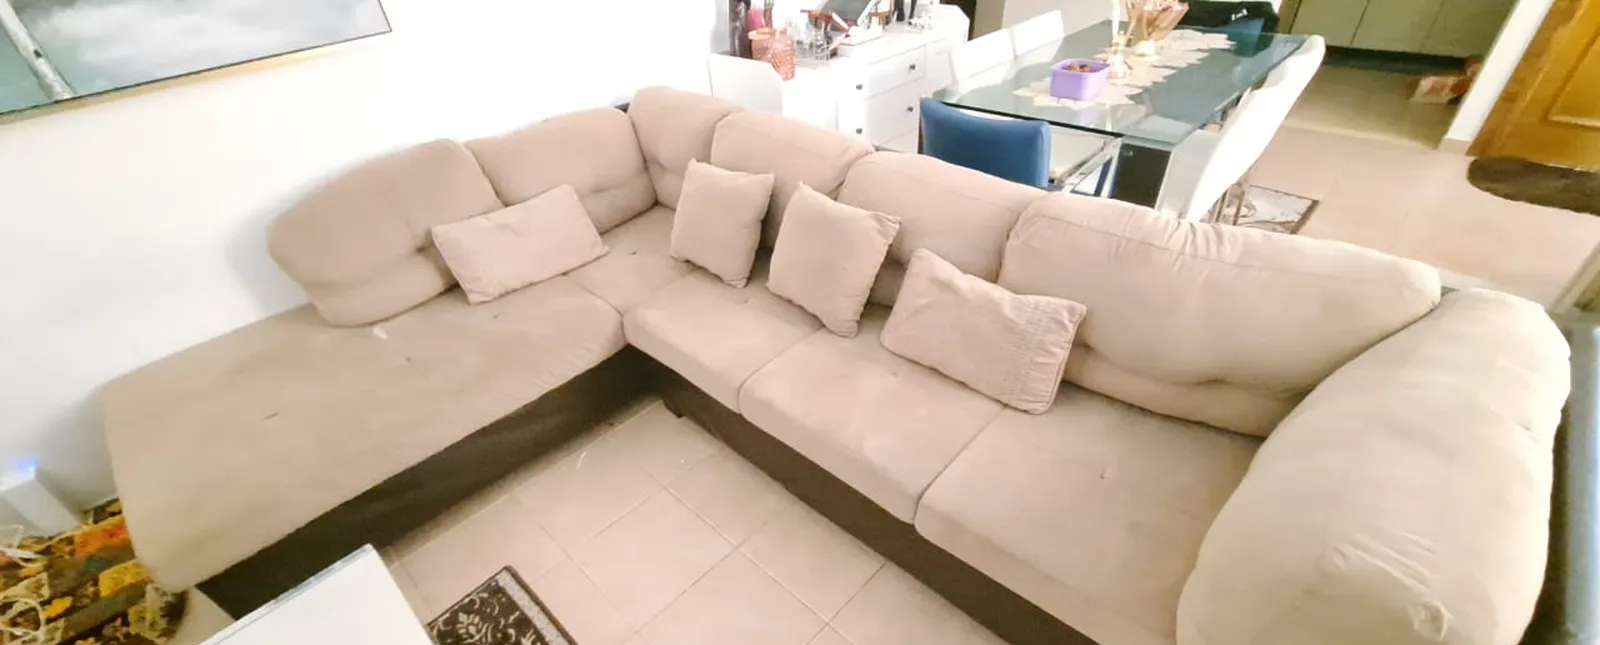 PAN EMIRATES 2 x SINGLE and L Shape 6 Seater Sofa Sets in good condition-image